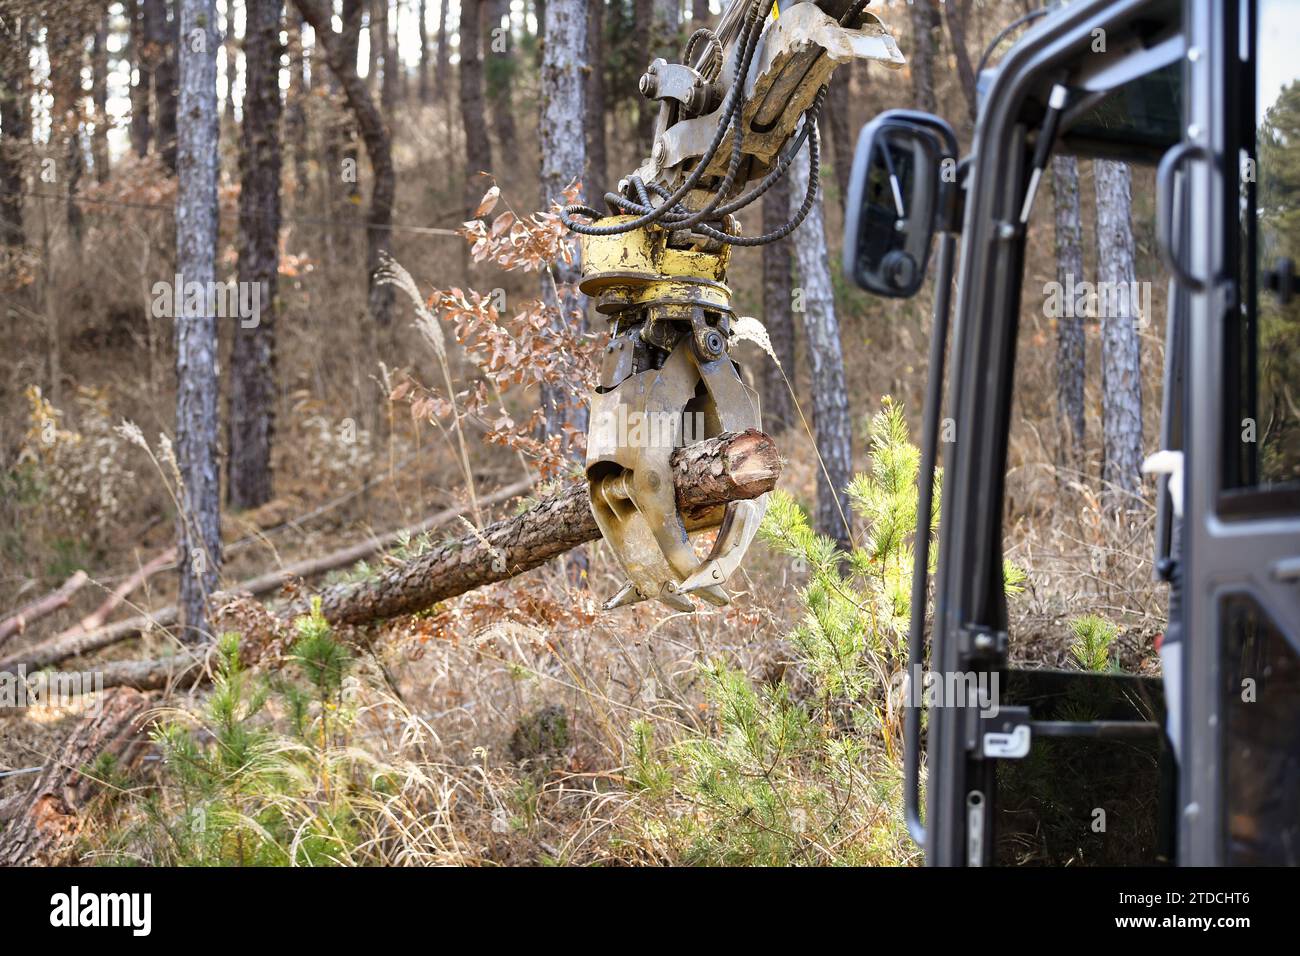 In the forest, workers are doing logging using equipment. Stock Photo